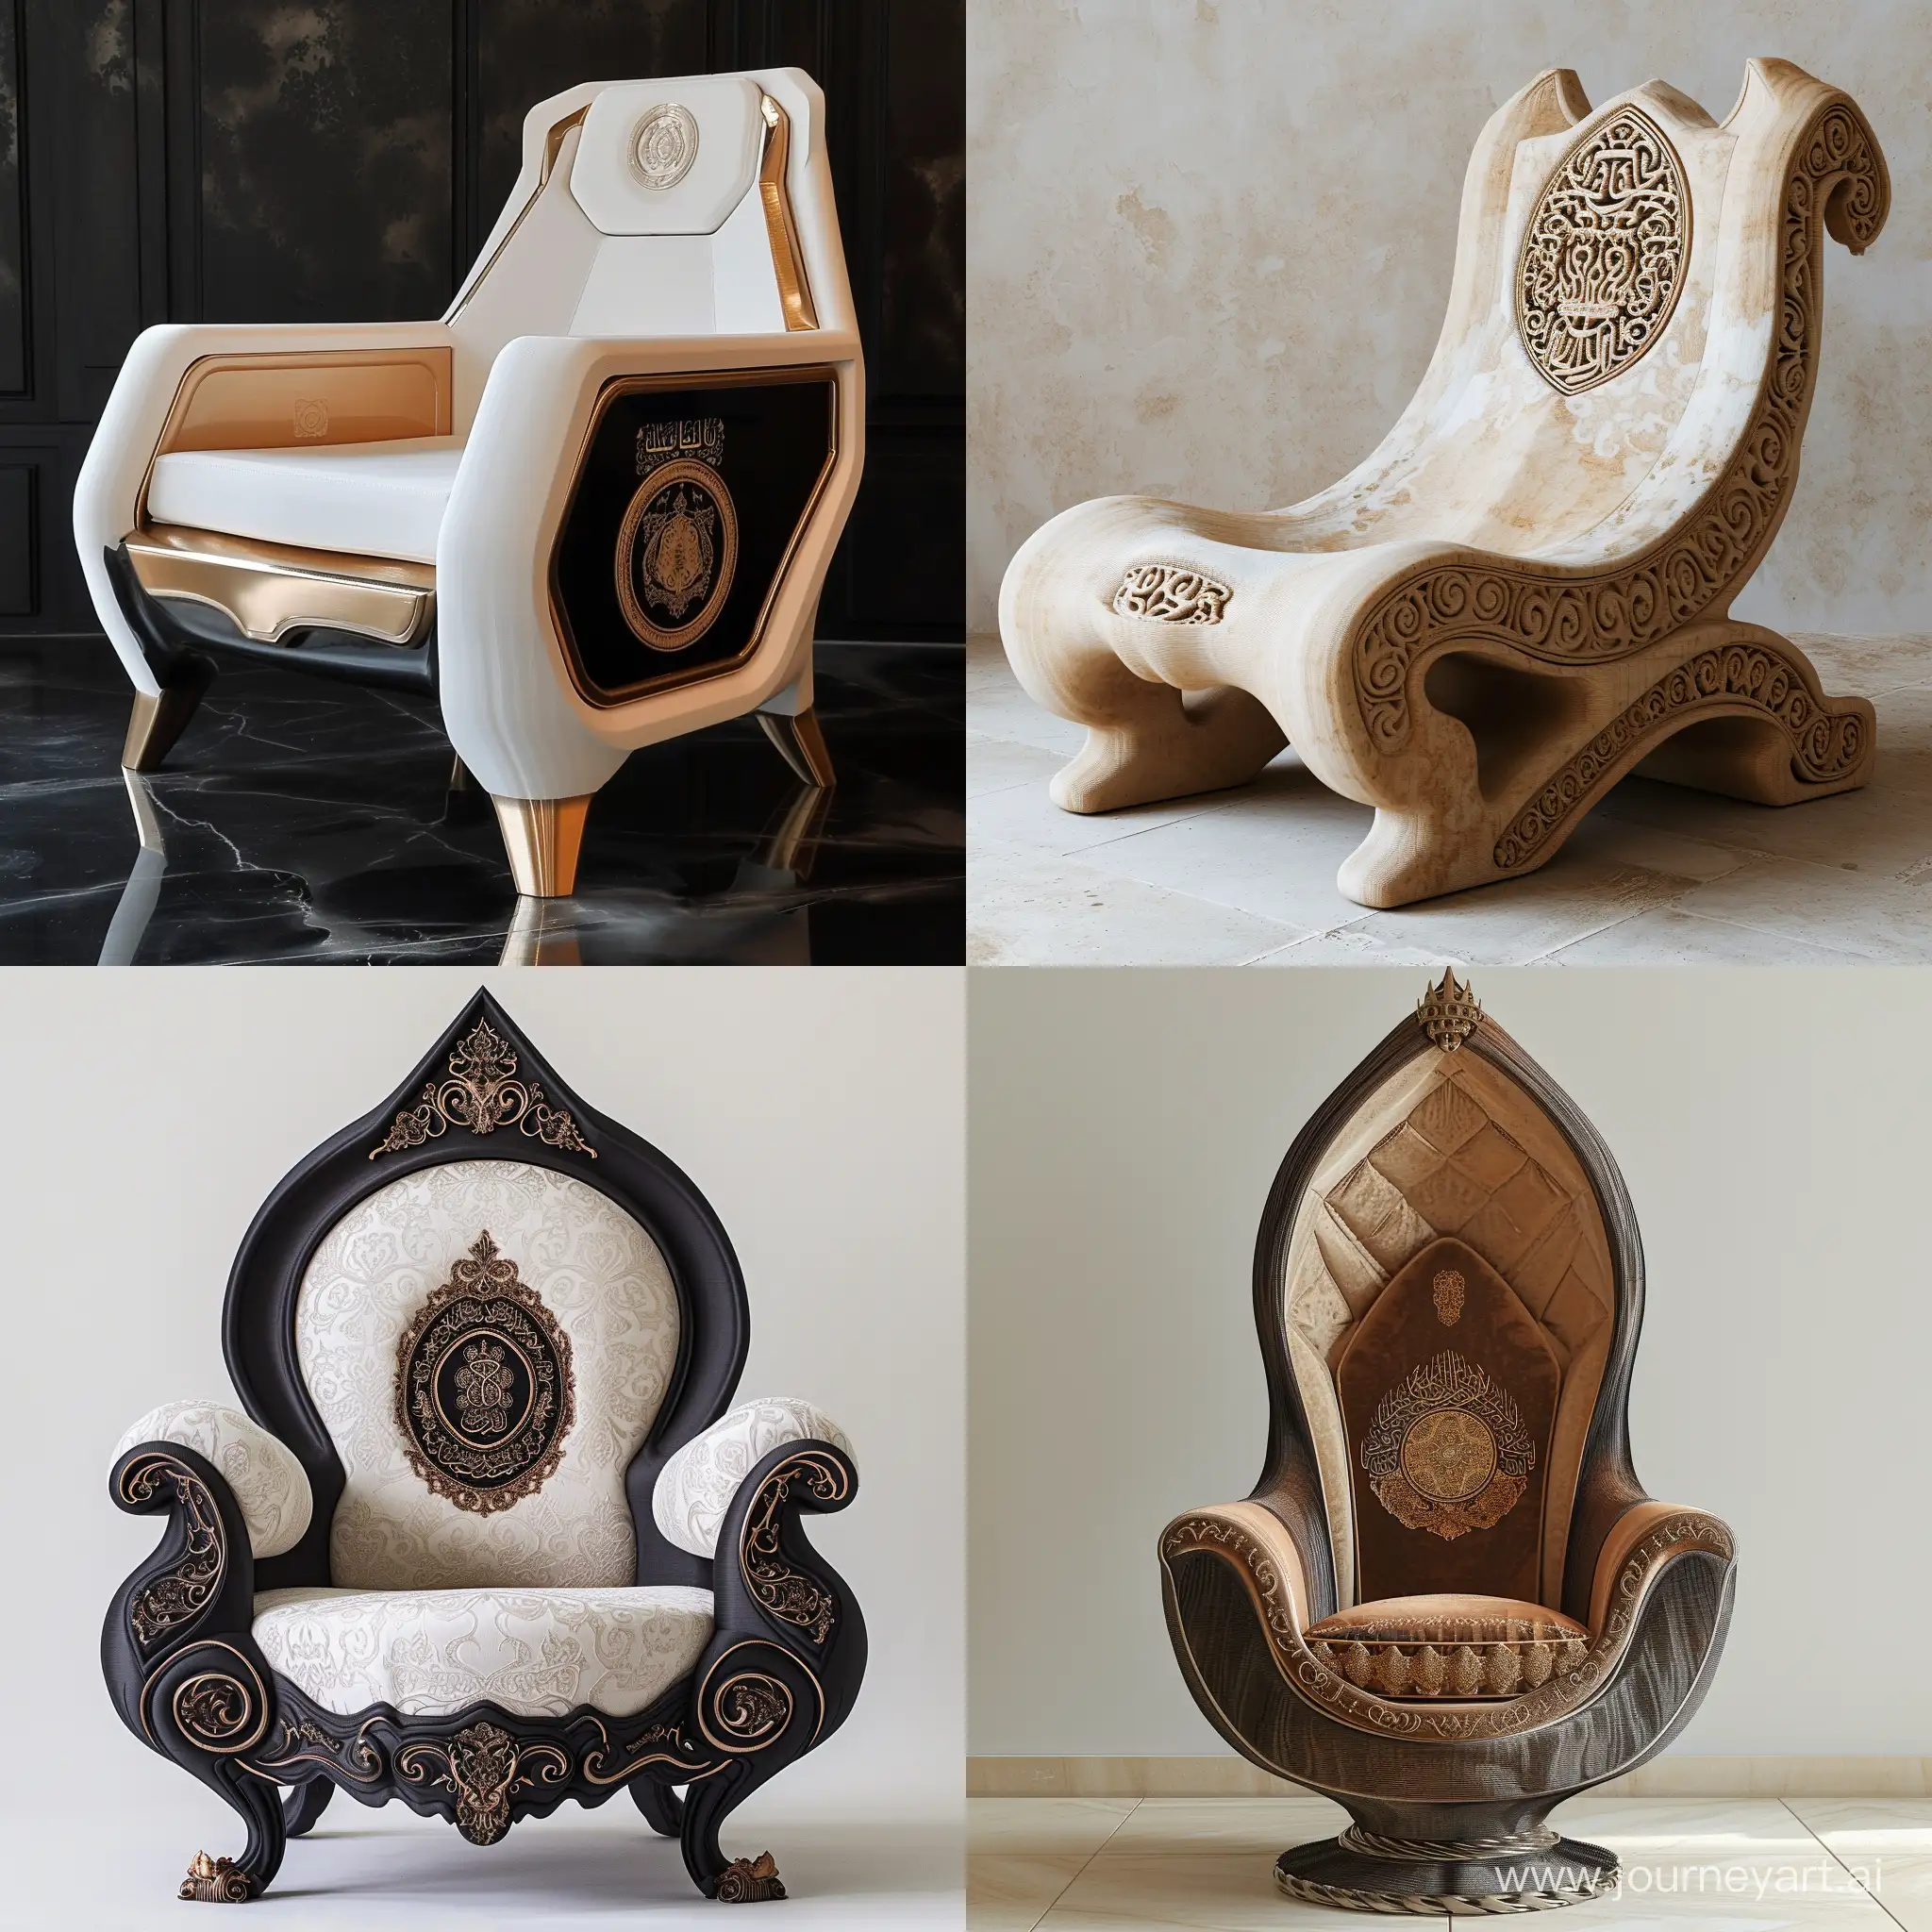 A strange chair that no one has, it was produced with a 3D printing machine and has a family emblem and Arab style